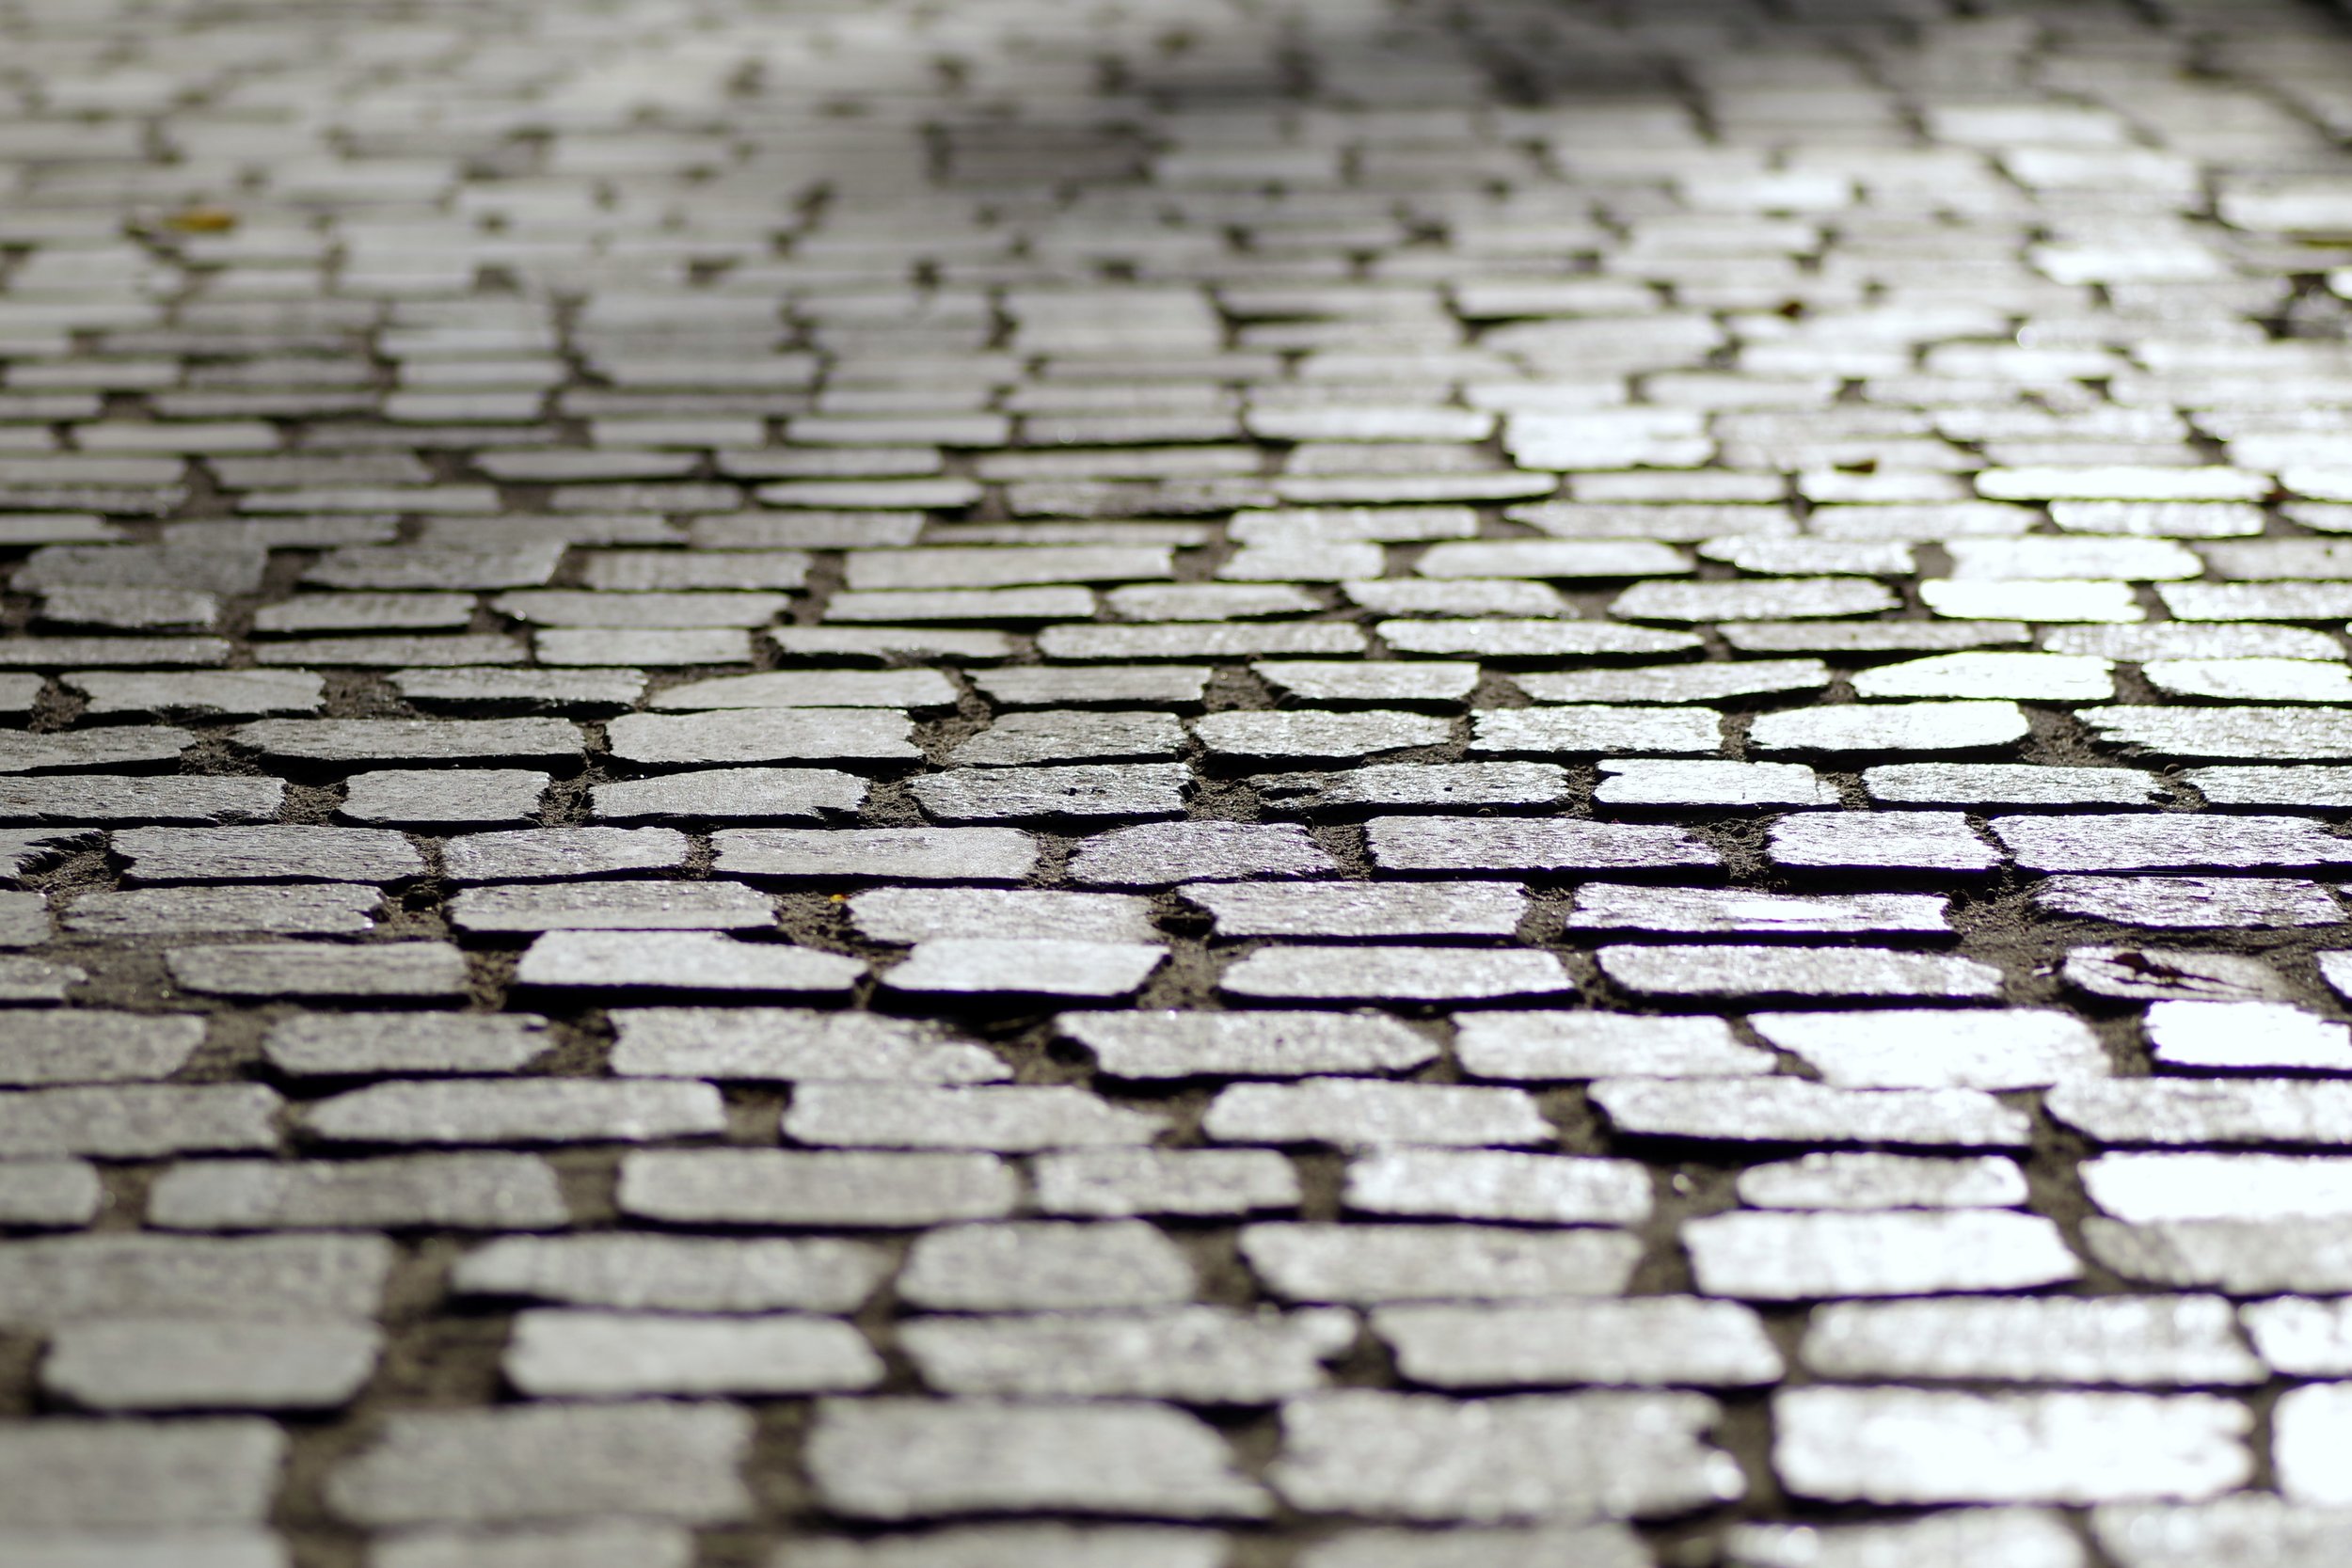 Green, porous, and cool sidewalk pavers mitigate urban heat and flood risk. 